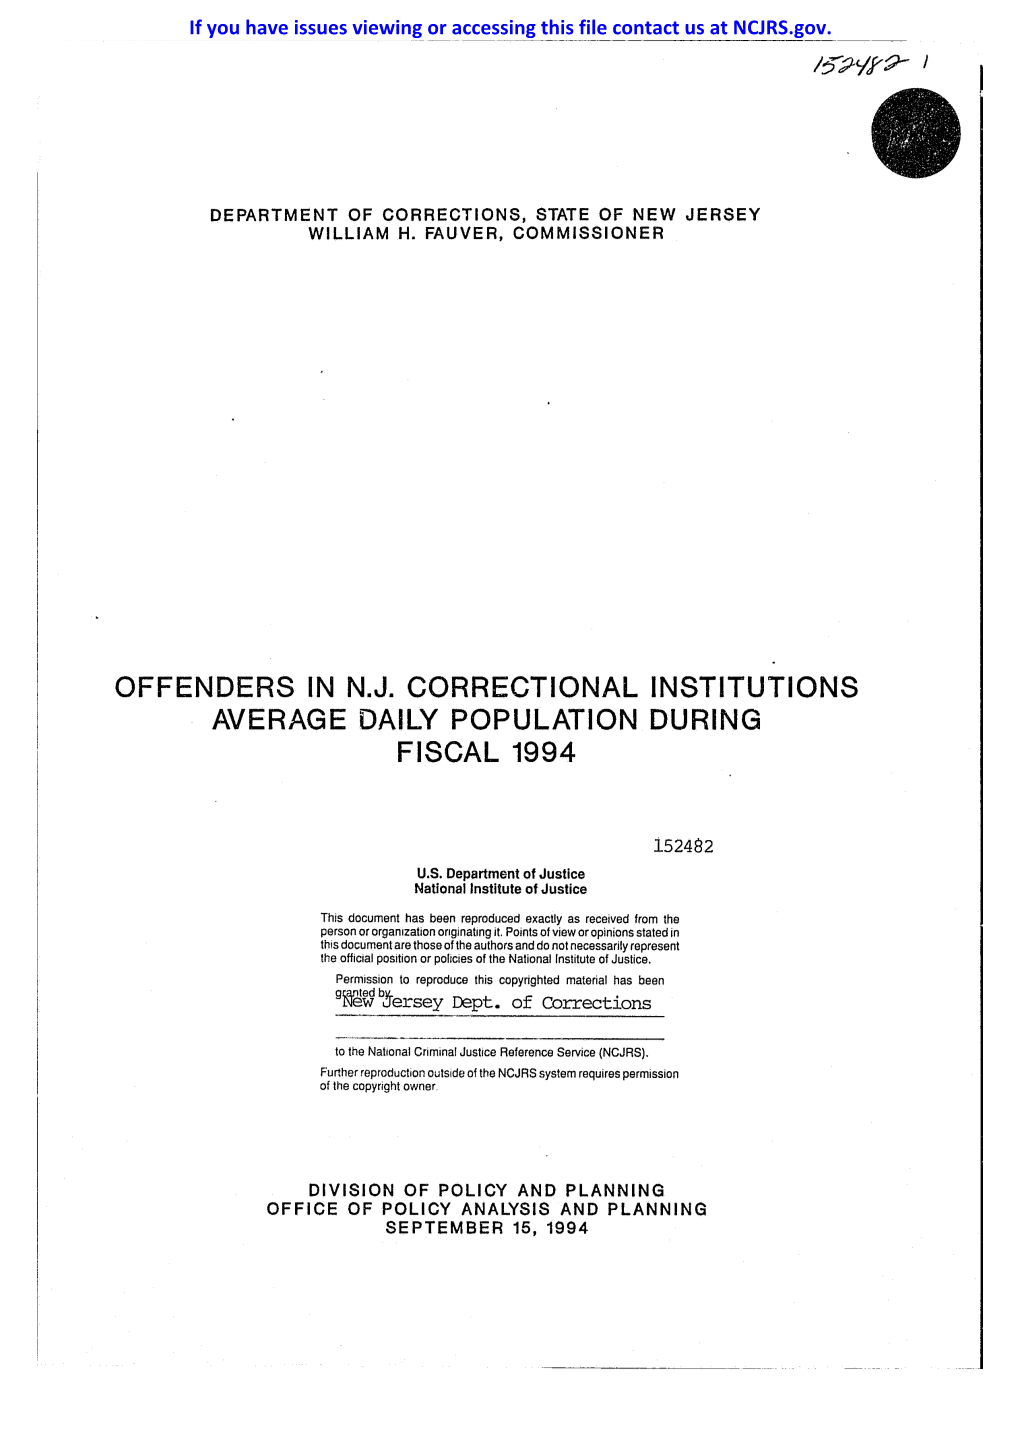 Offenders in N.J. Correctional Institutions Average Daily Population During Fiscal 1994